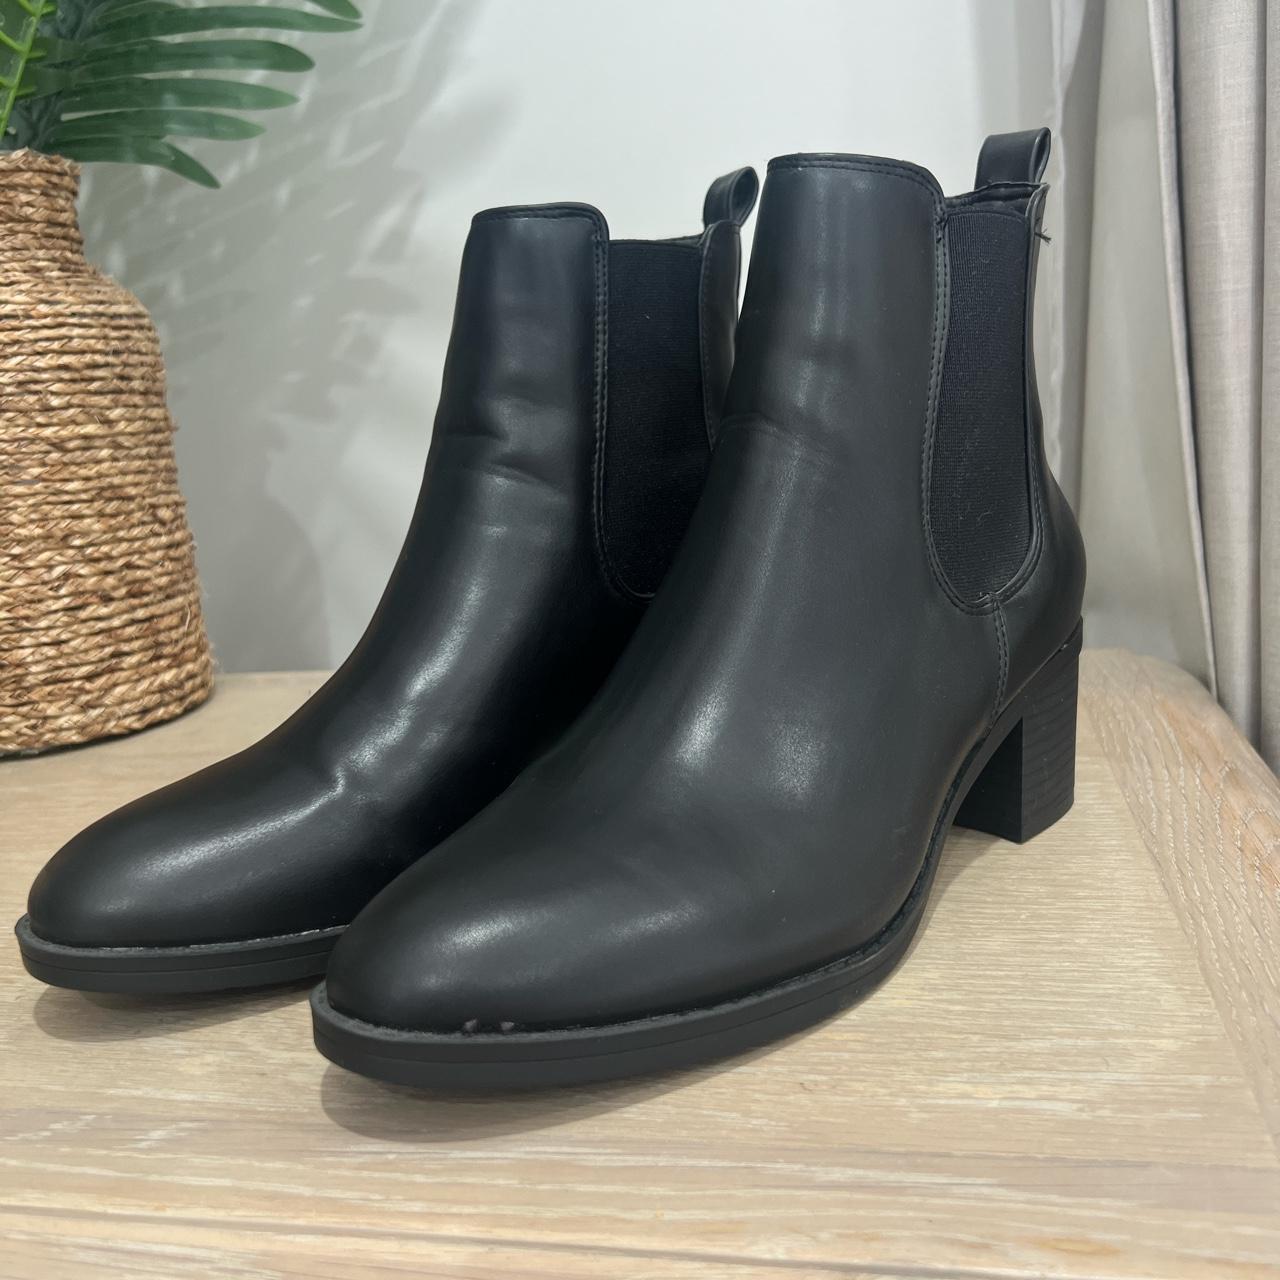 Bett’s leather ankle boots Never been worn - Depop